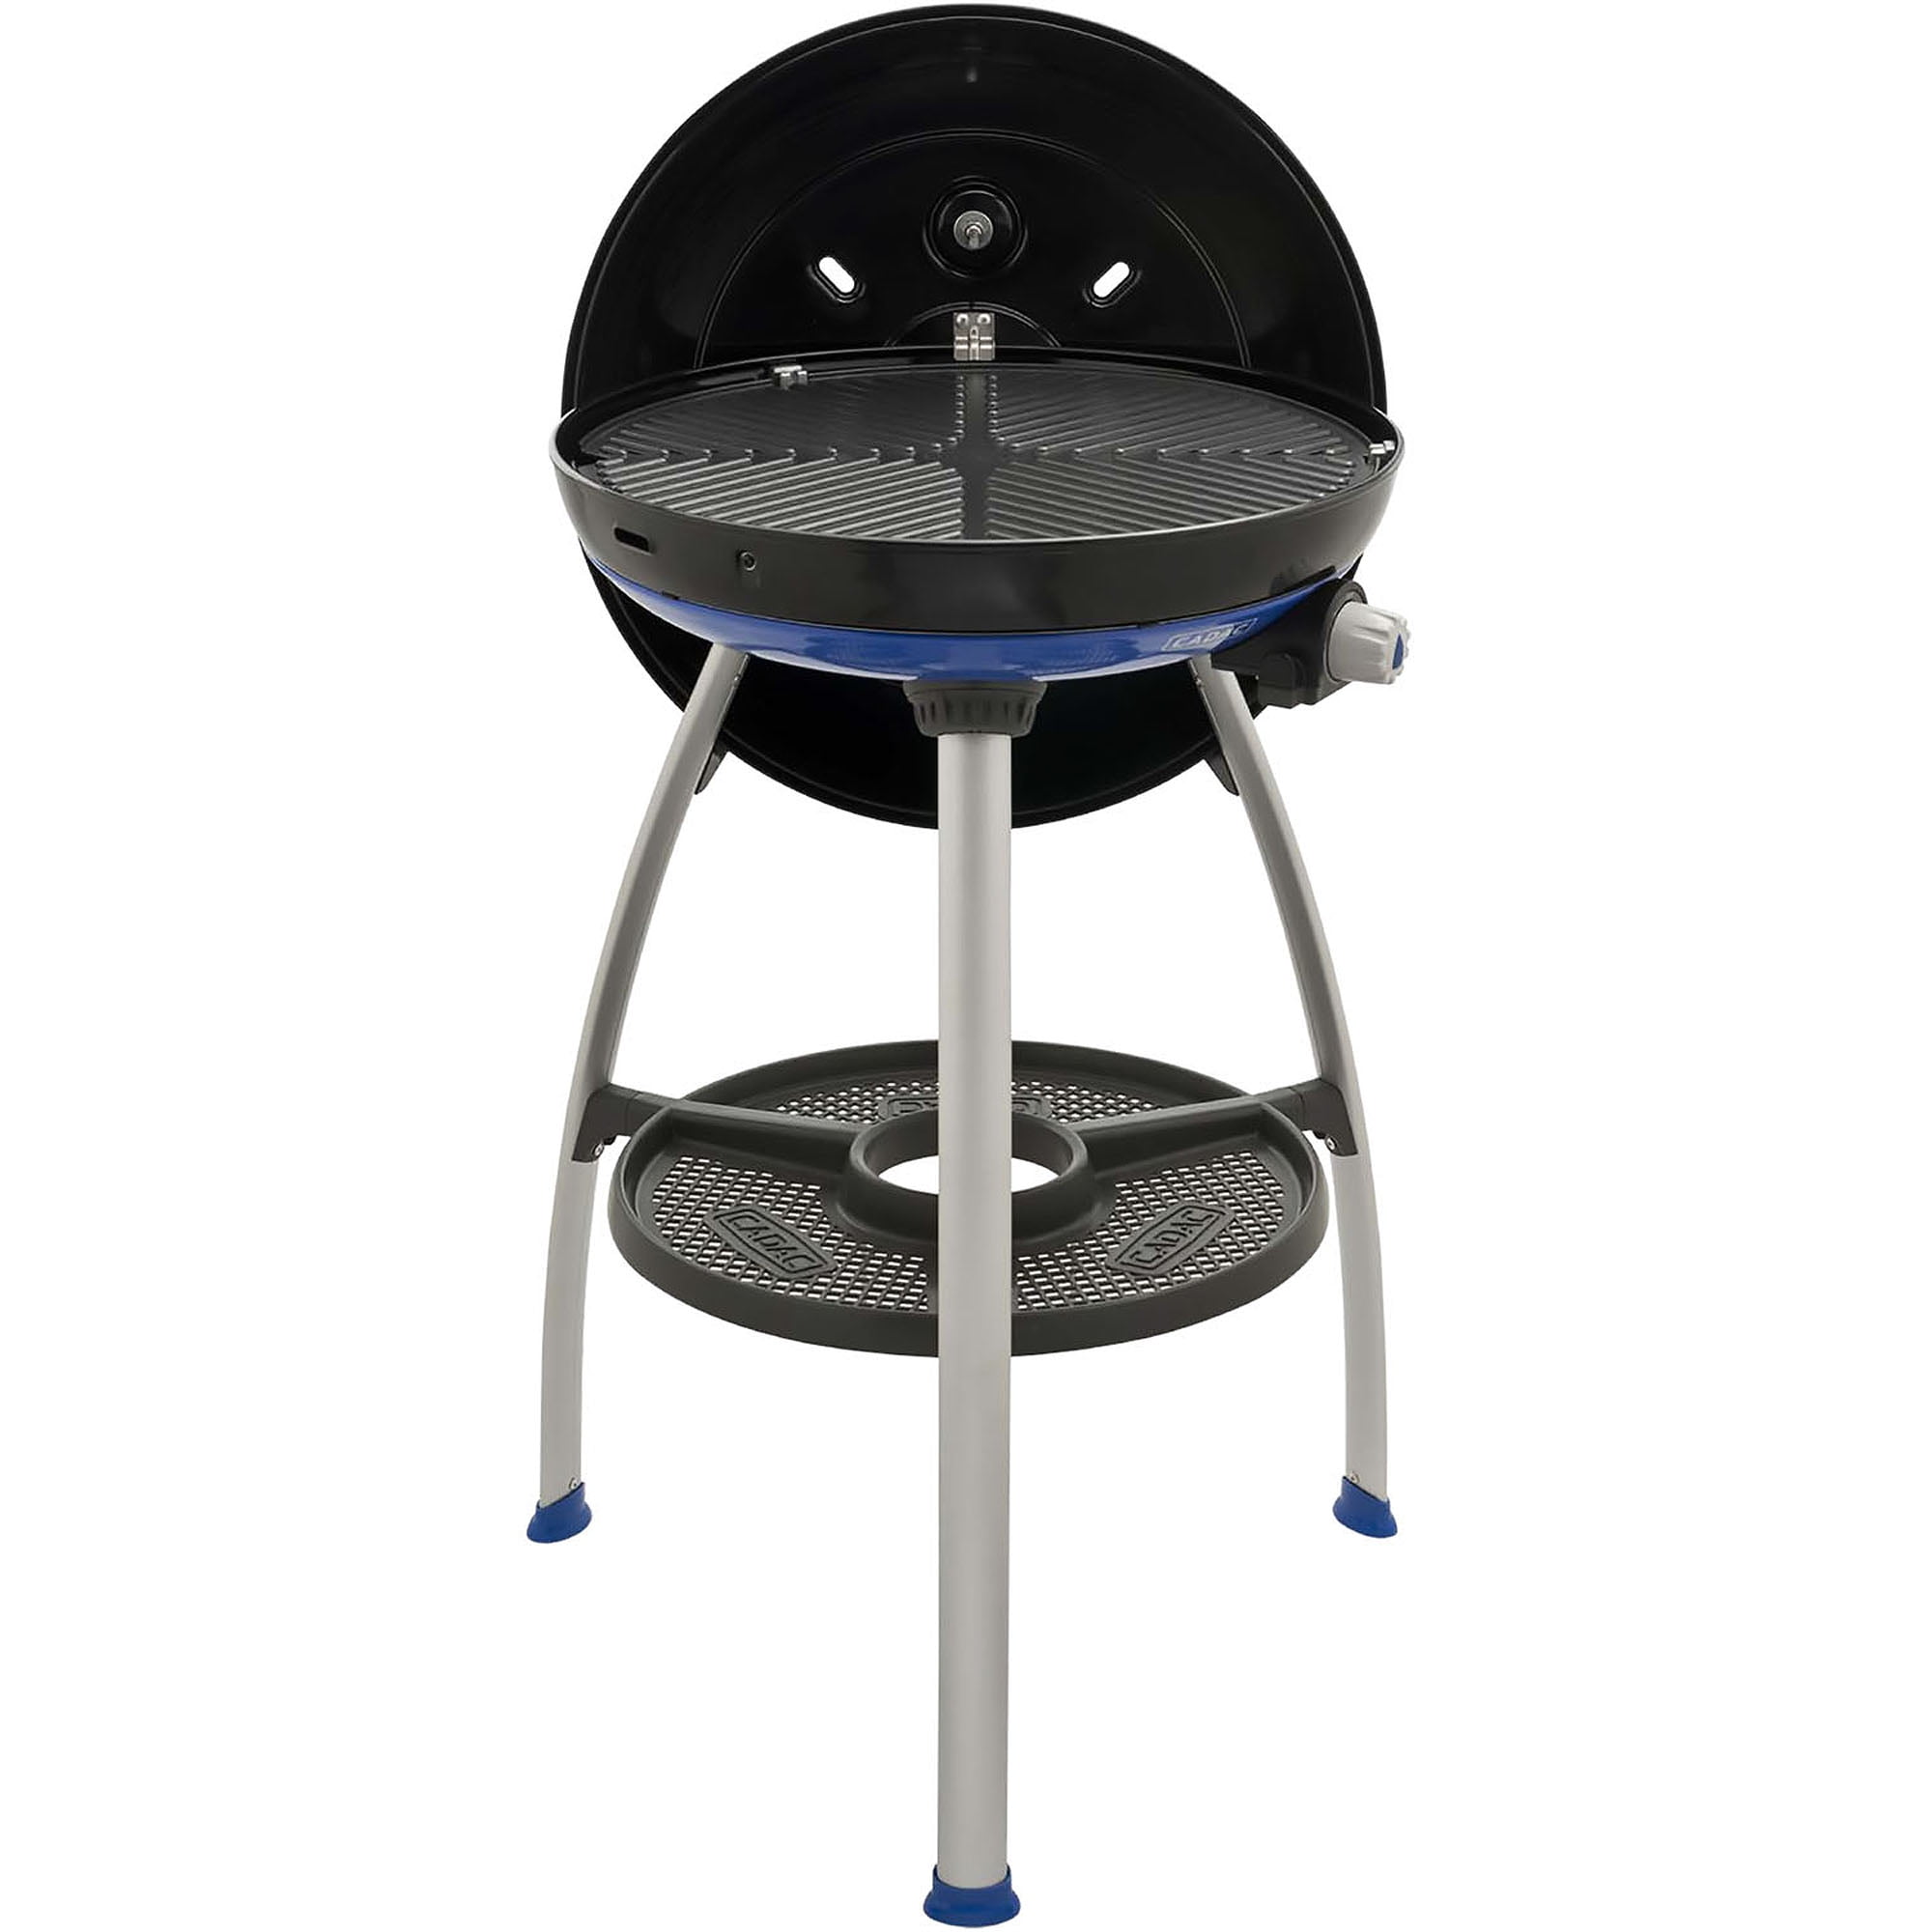 Cadac Chef 2 Outdoor Gas with Pot and BBQ Grid - Walmart.com